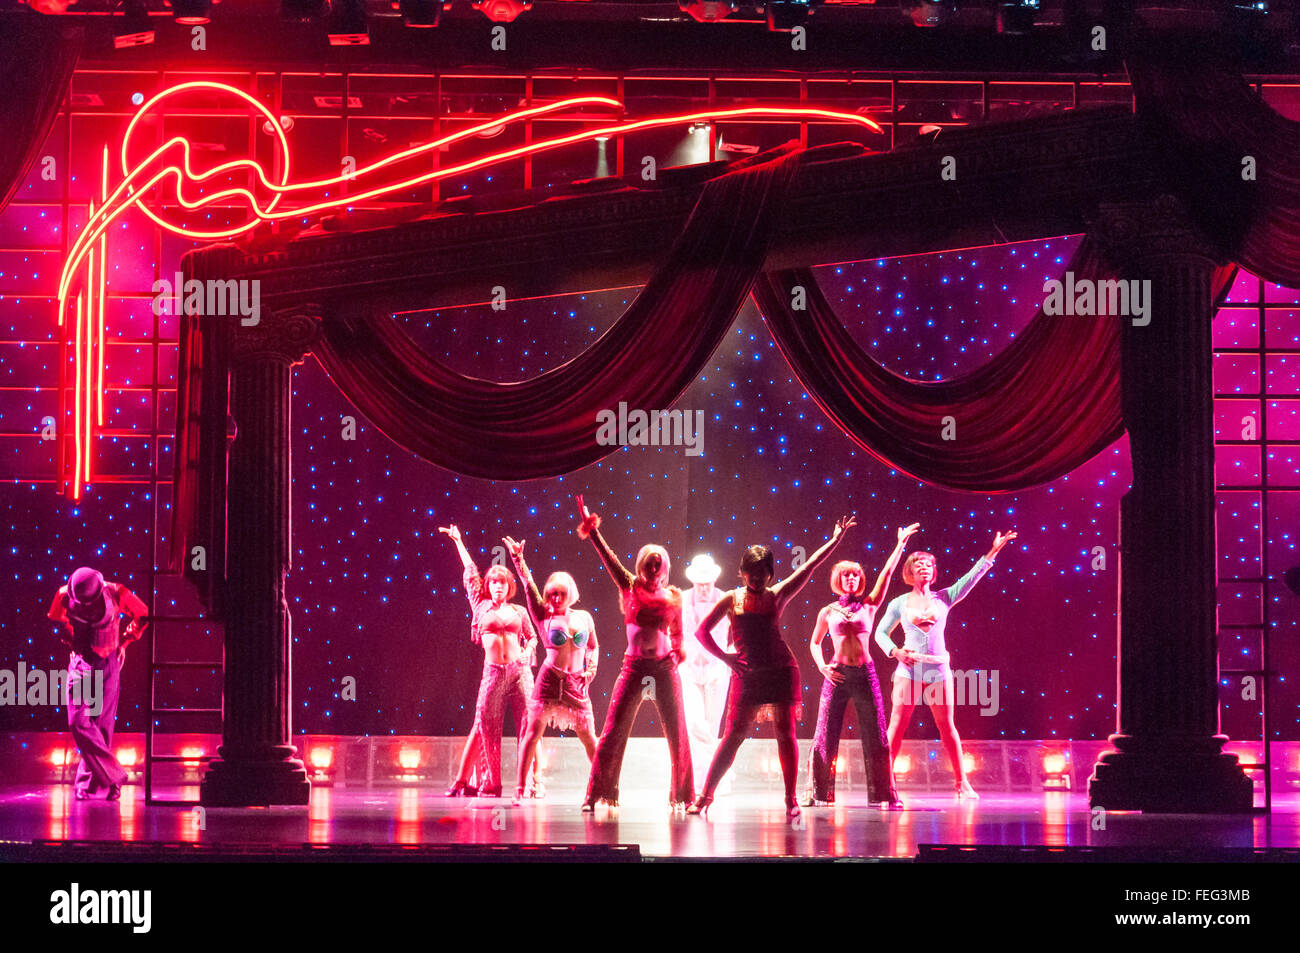 Showtime in Pacifica Theatre, Royal Caribbean's Brilliance of the Seas cruise ship, North Sea, Europe Stock Photo